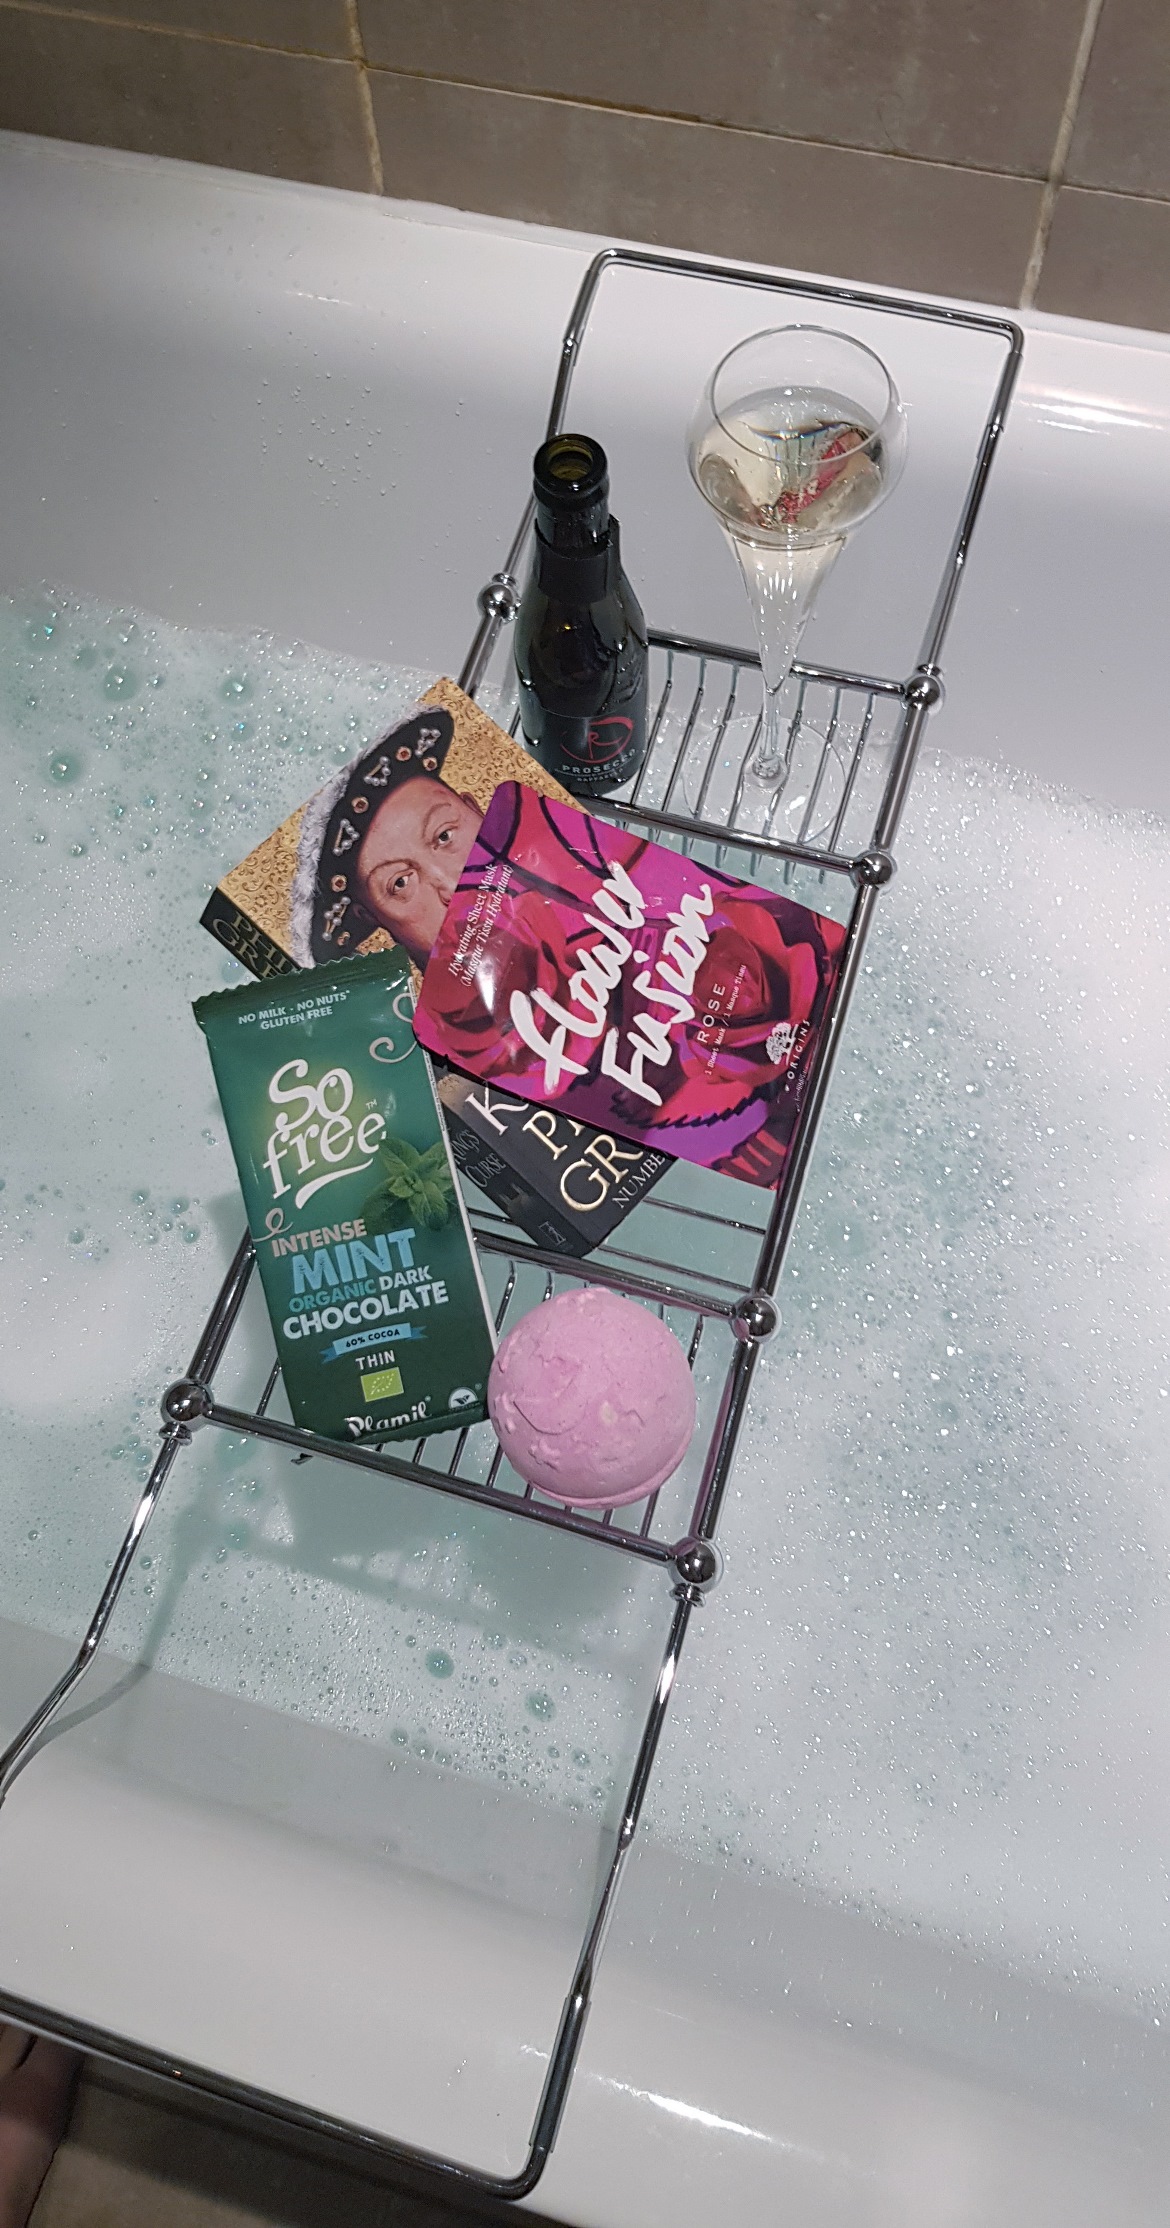 Sanctuary Bath Caddy - My "Perfect" Night In with Sanctuary Bathrooms by BeckyBecky Blogs